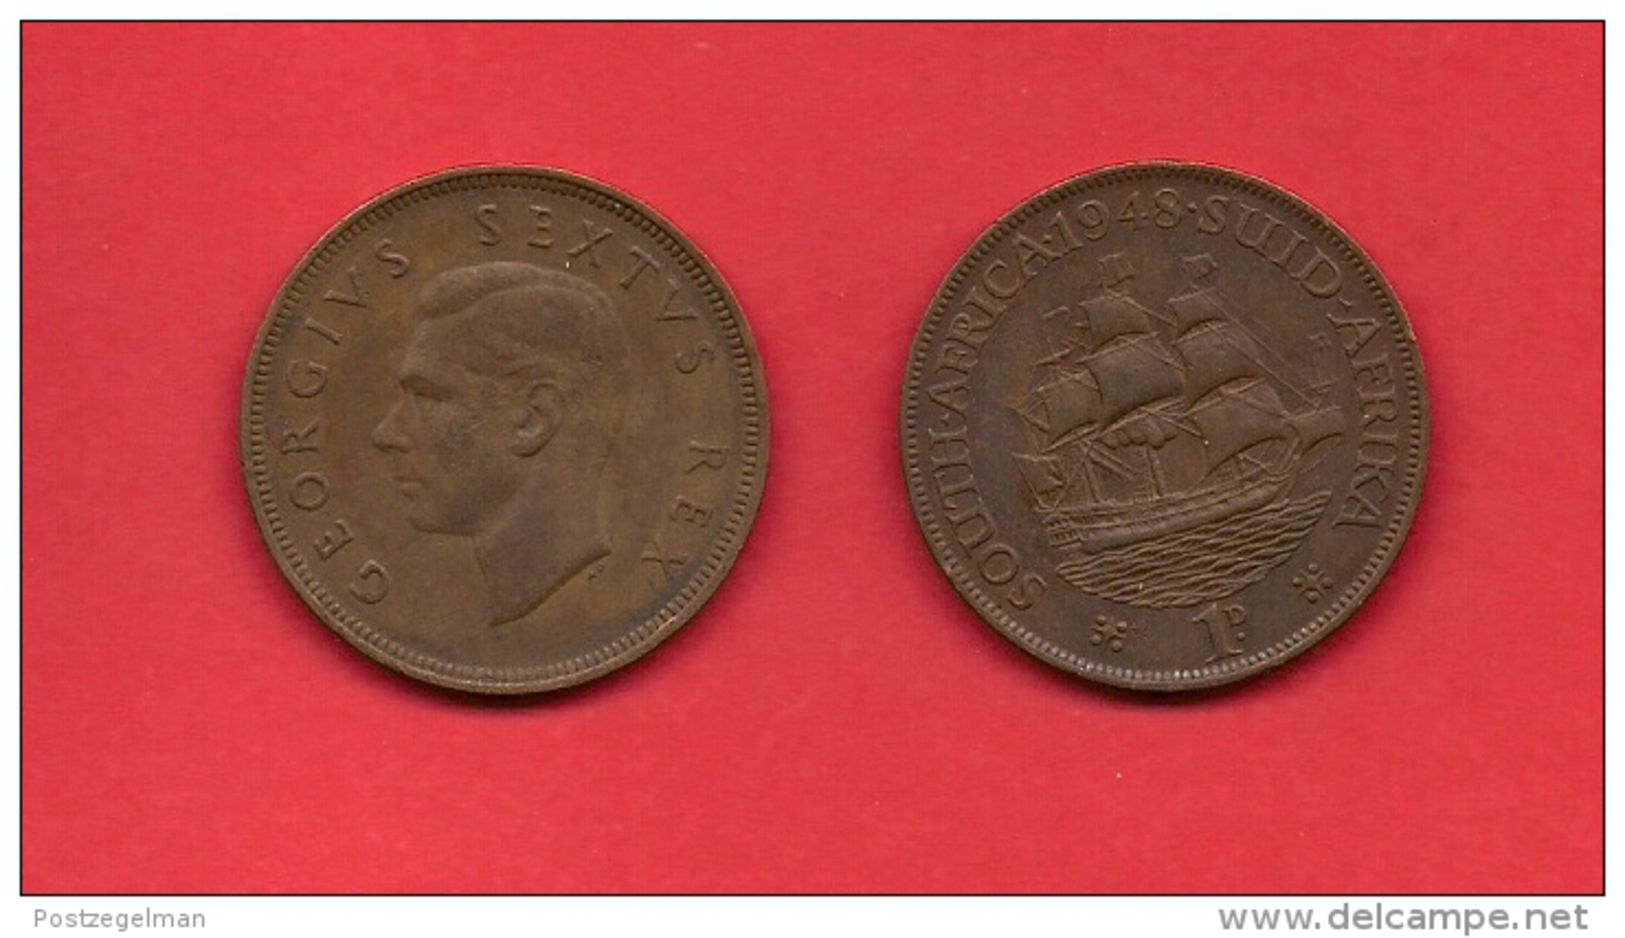 SOUTH AFRICA, 1948,  Circulated Coin, 1 Penny, George VI, Km 34.1, C1429 - South Africa